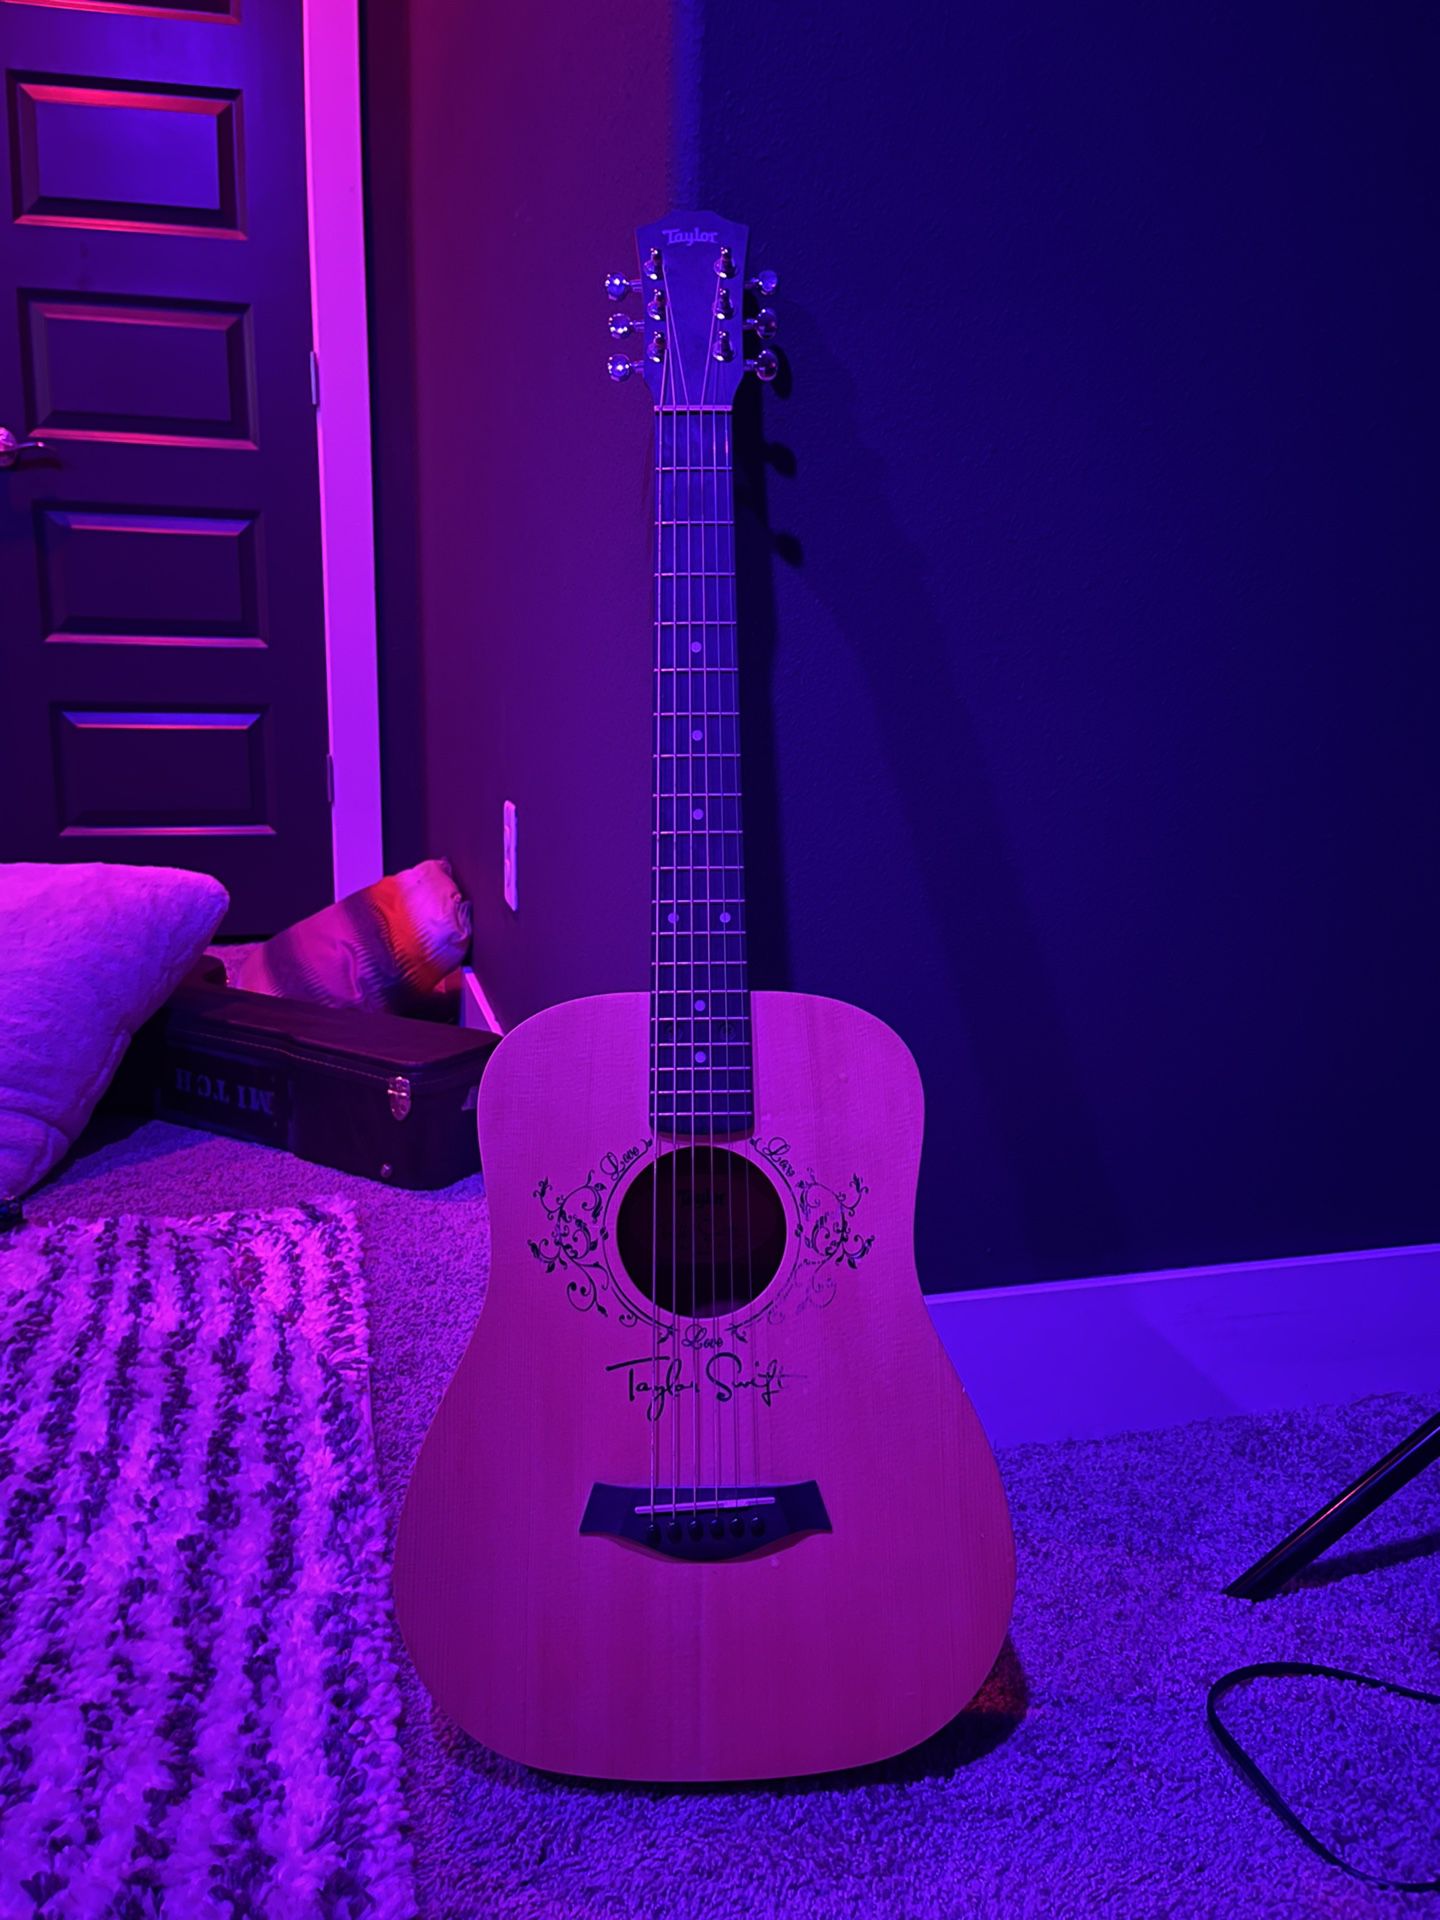 Taylor Swift kids taylor guitar (case included!)